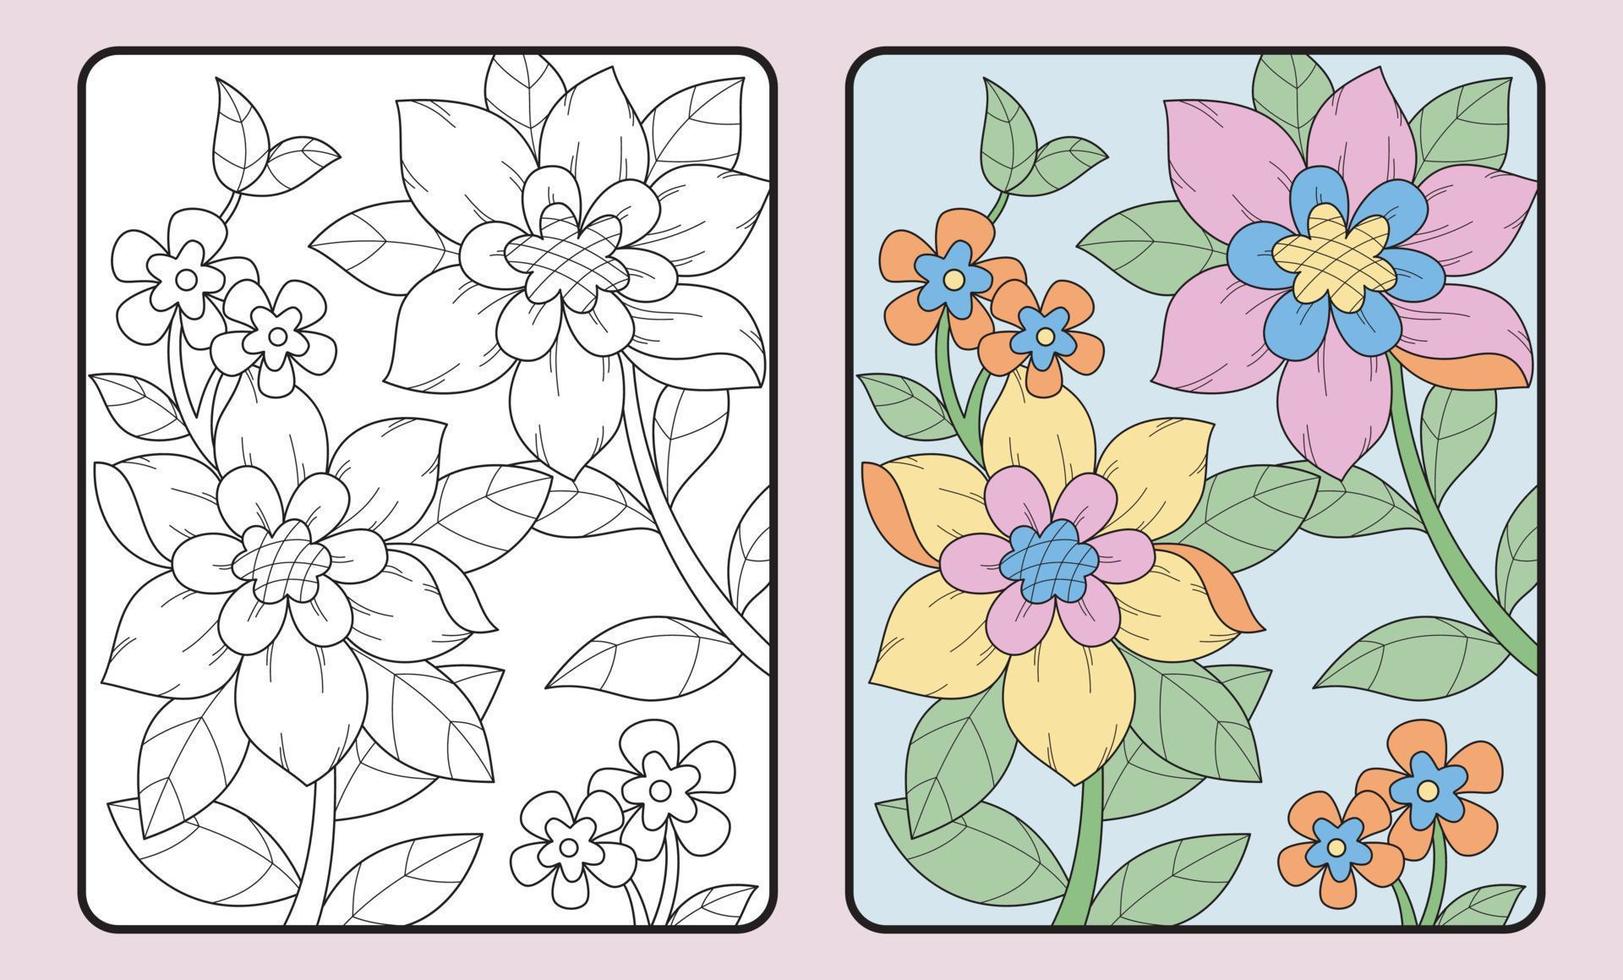 learn coloring for kids and elementary school. flower vector. vector